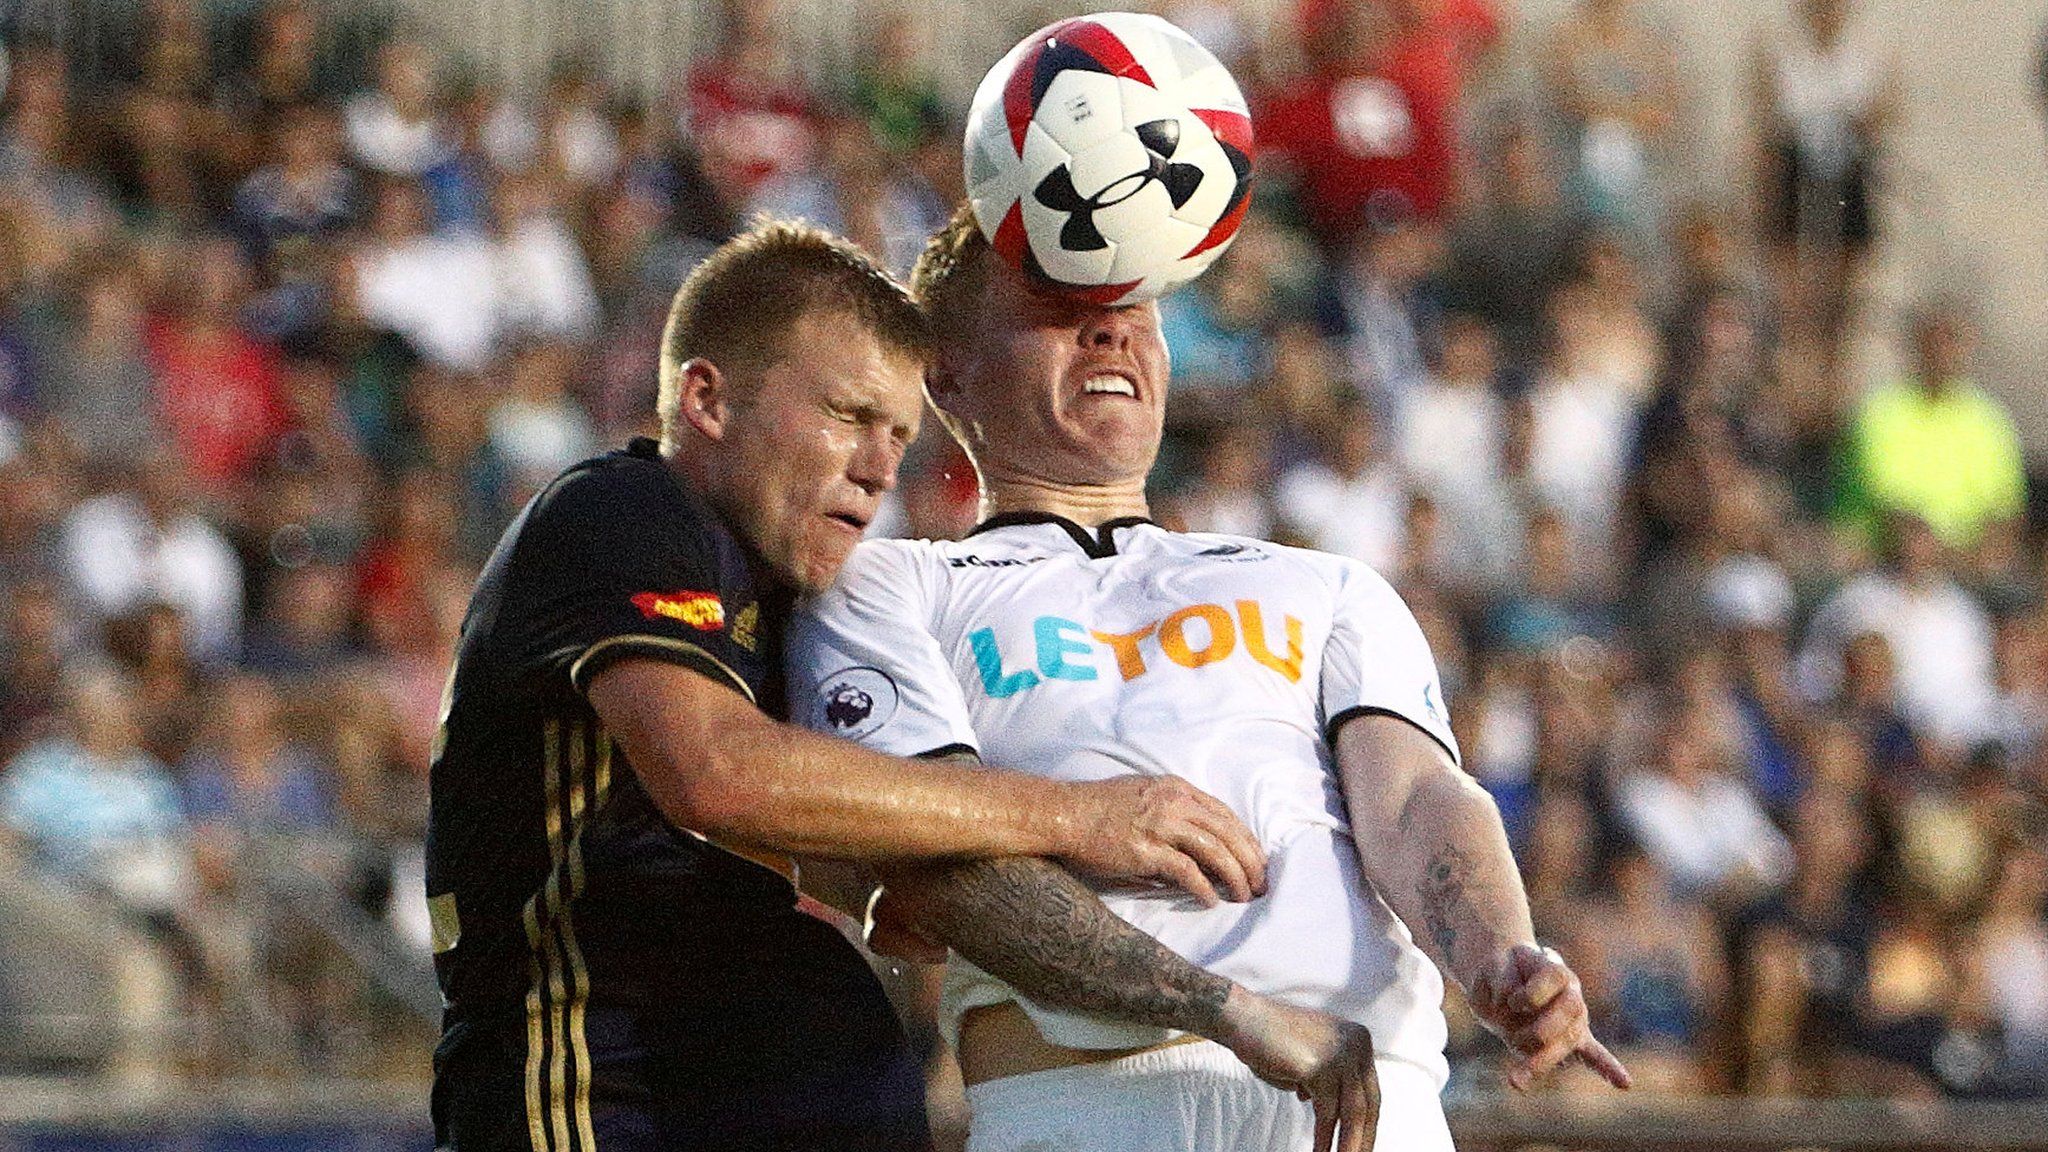 Swansea City's Alfie Mawson in action with North Carolina's Brad Ruhaak